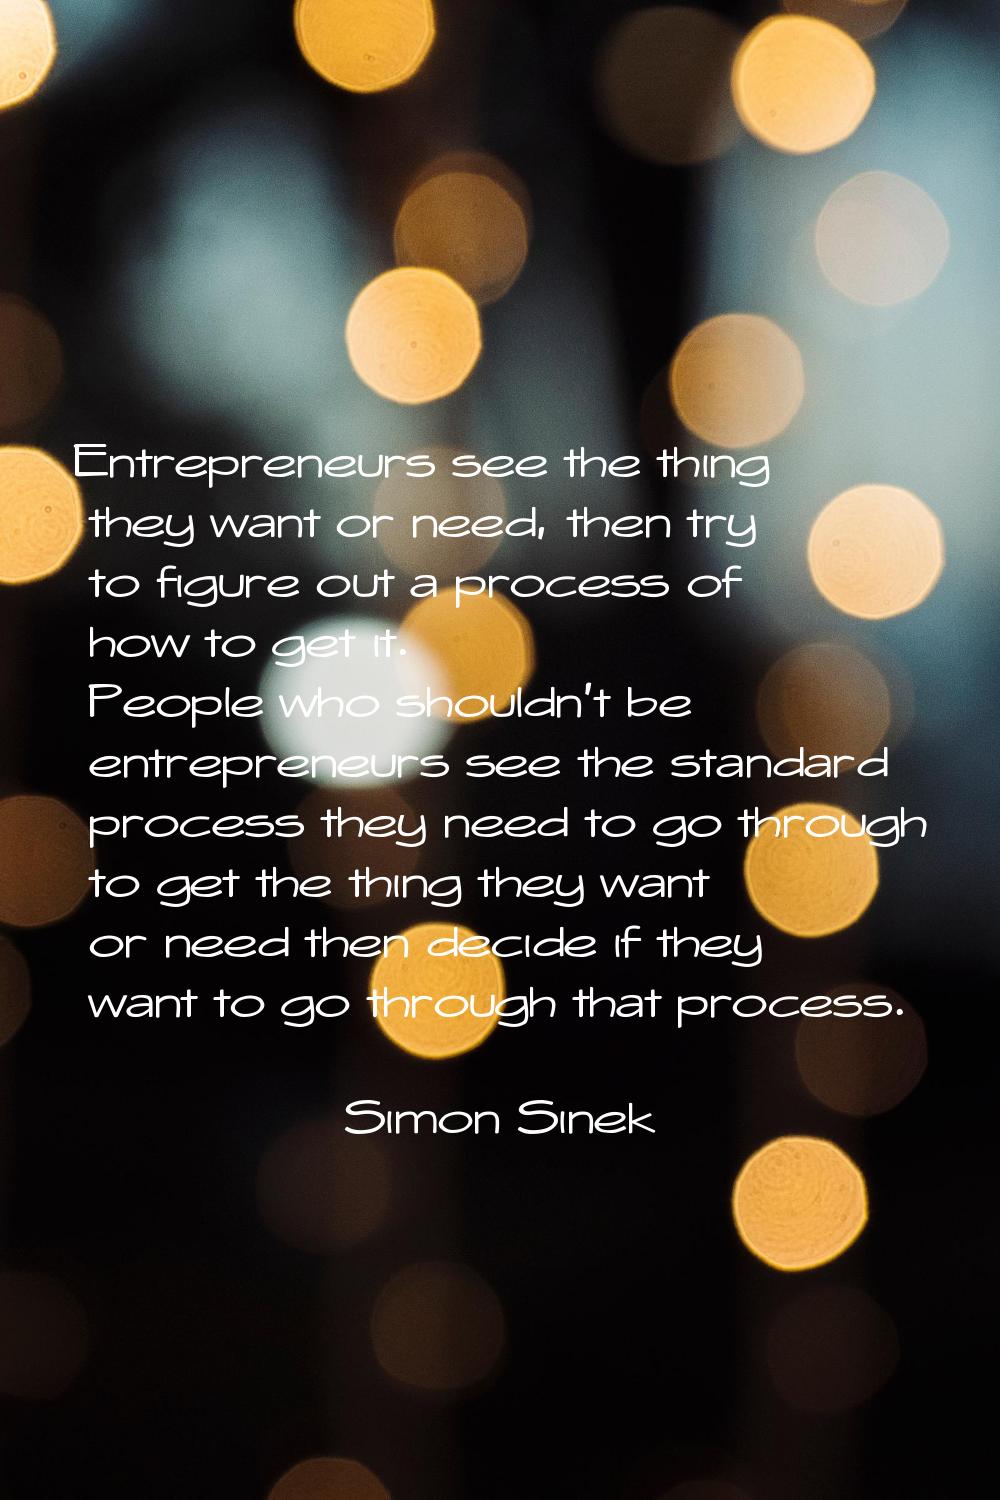 Entrepreneurs see the thing they want or need, then try to figure out a process of how to get it. P